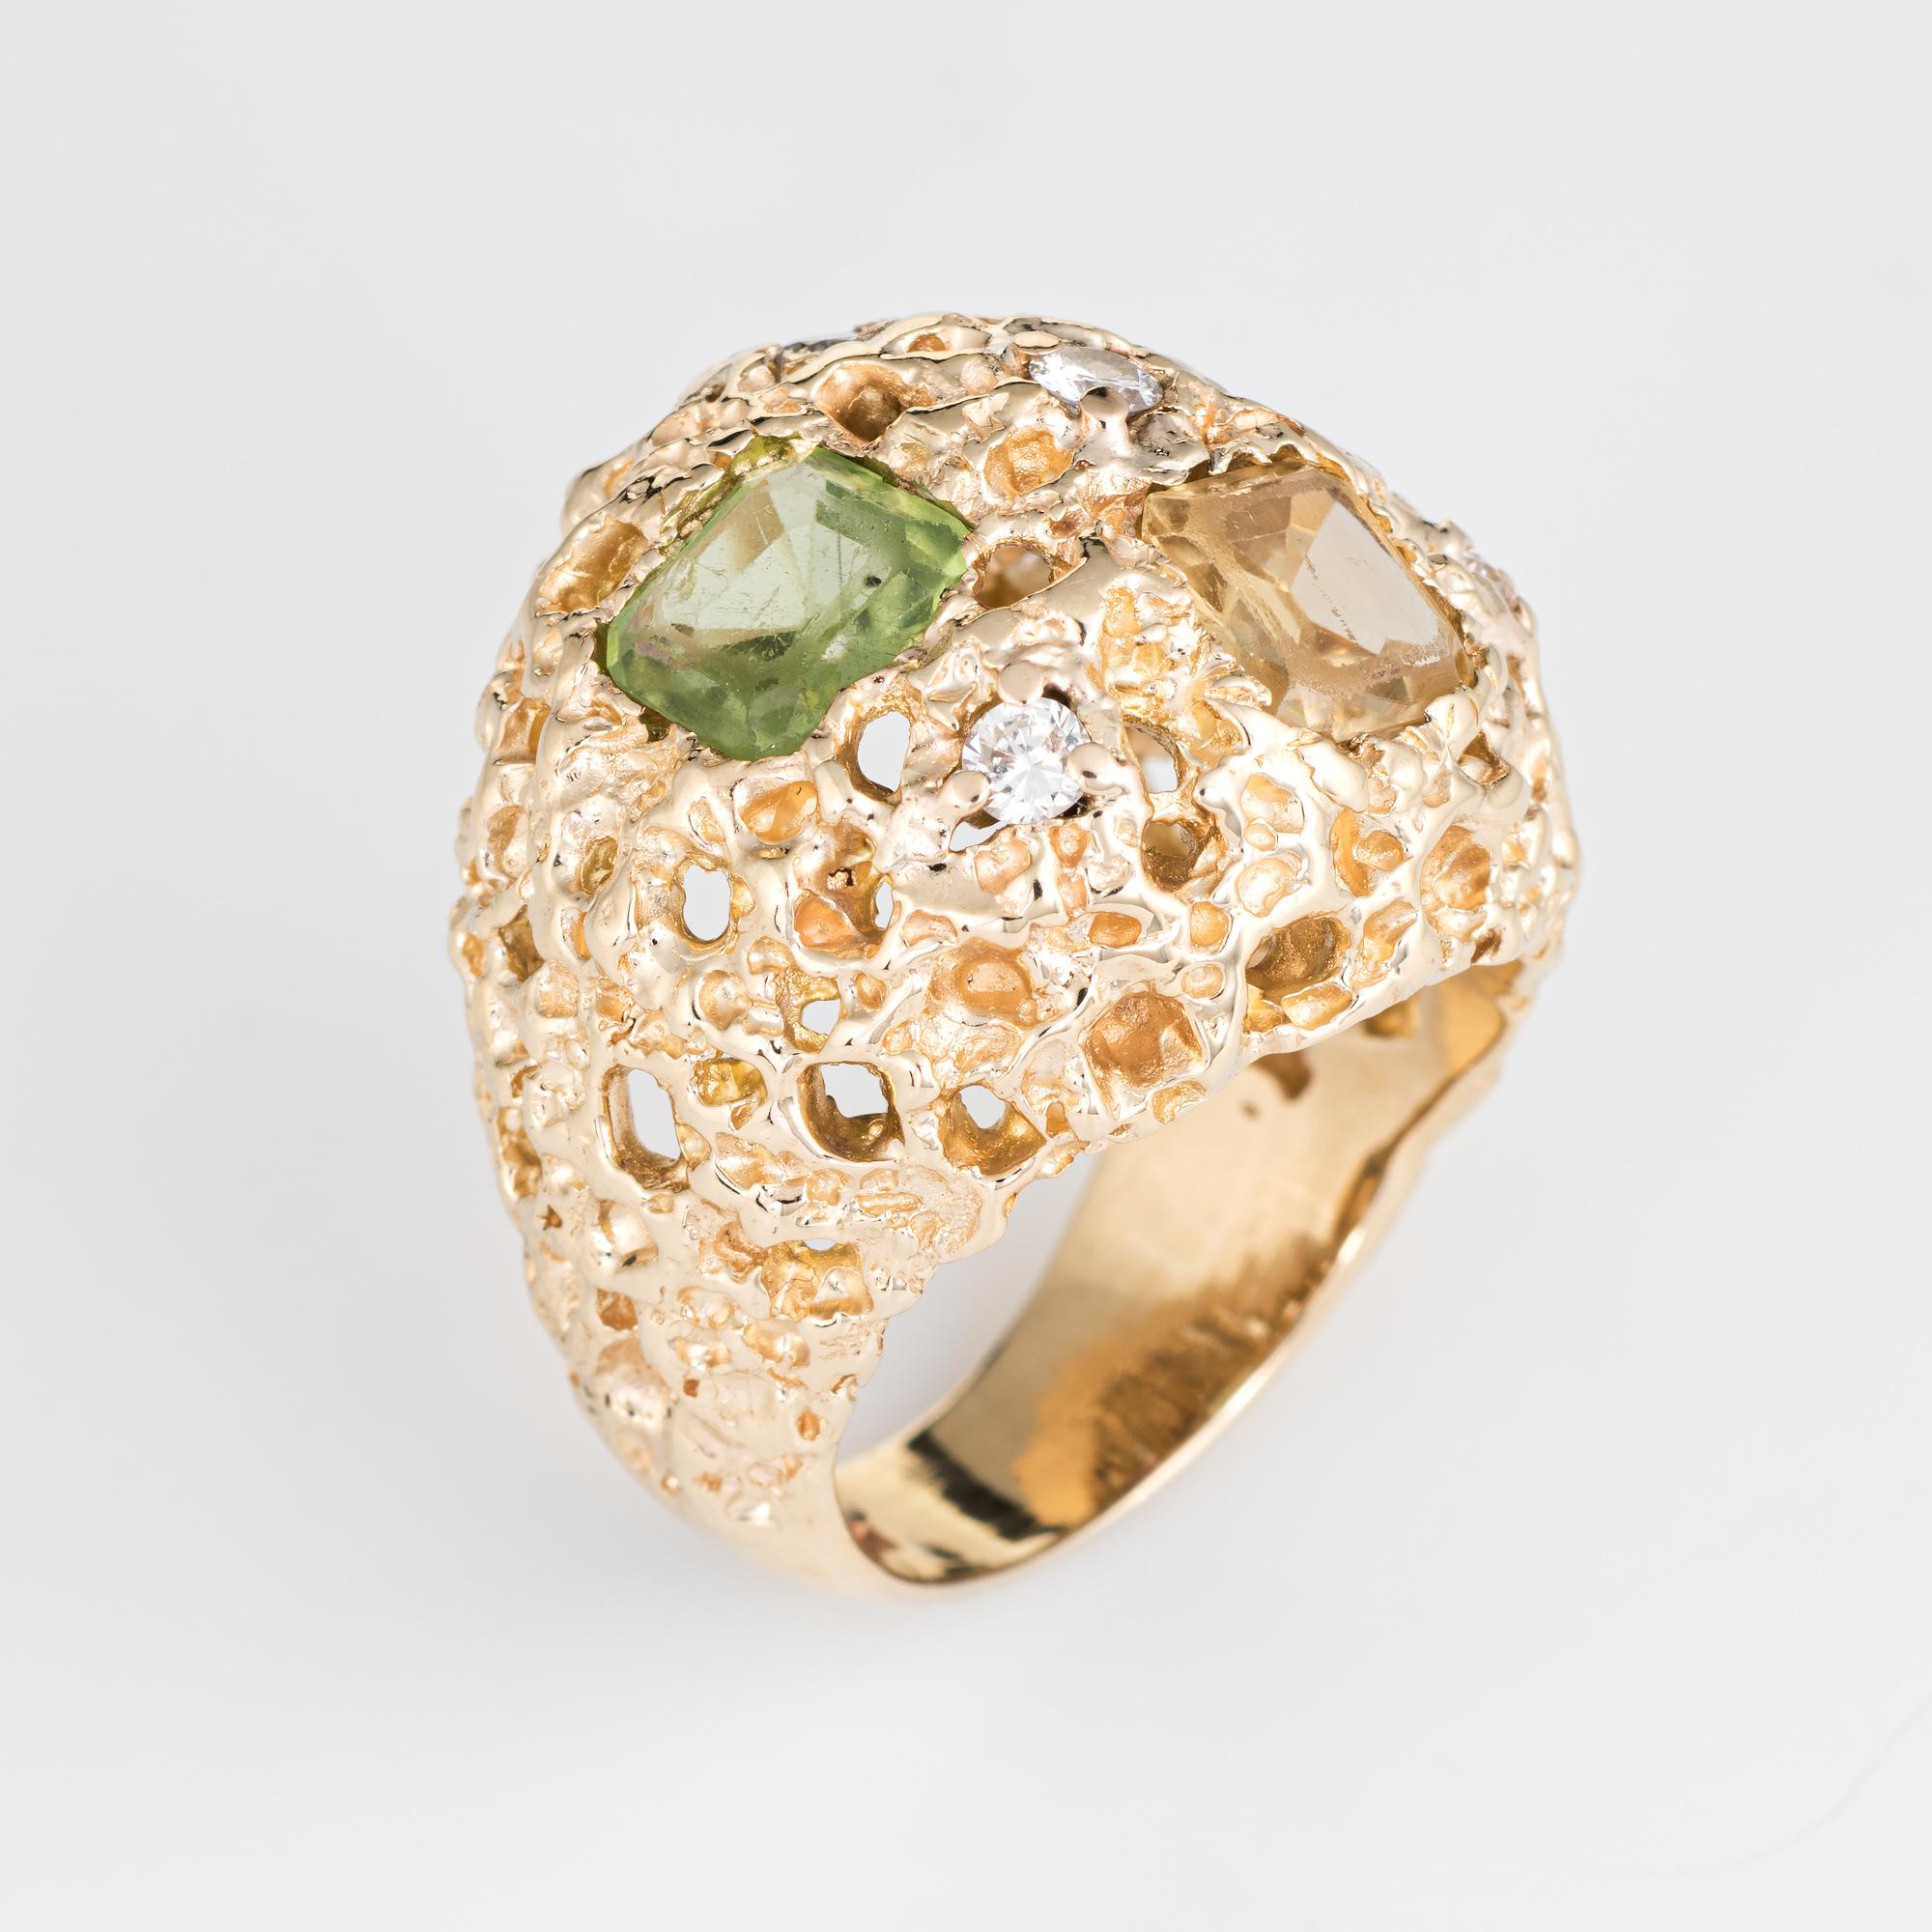 Stylish vintage gemstone dome cocktail ring (circa 1970s) crafted in 14 karat yellow gold. 

Square cut peridot, citrine and pink tourmaline each measure 7mm (estimated at 0.80 carats each - 2.40 carats total estimated weight). Four diamonds are